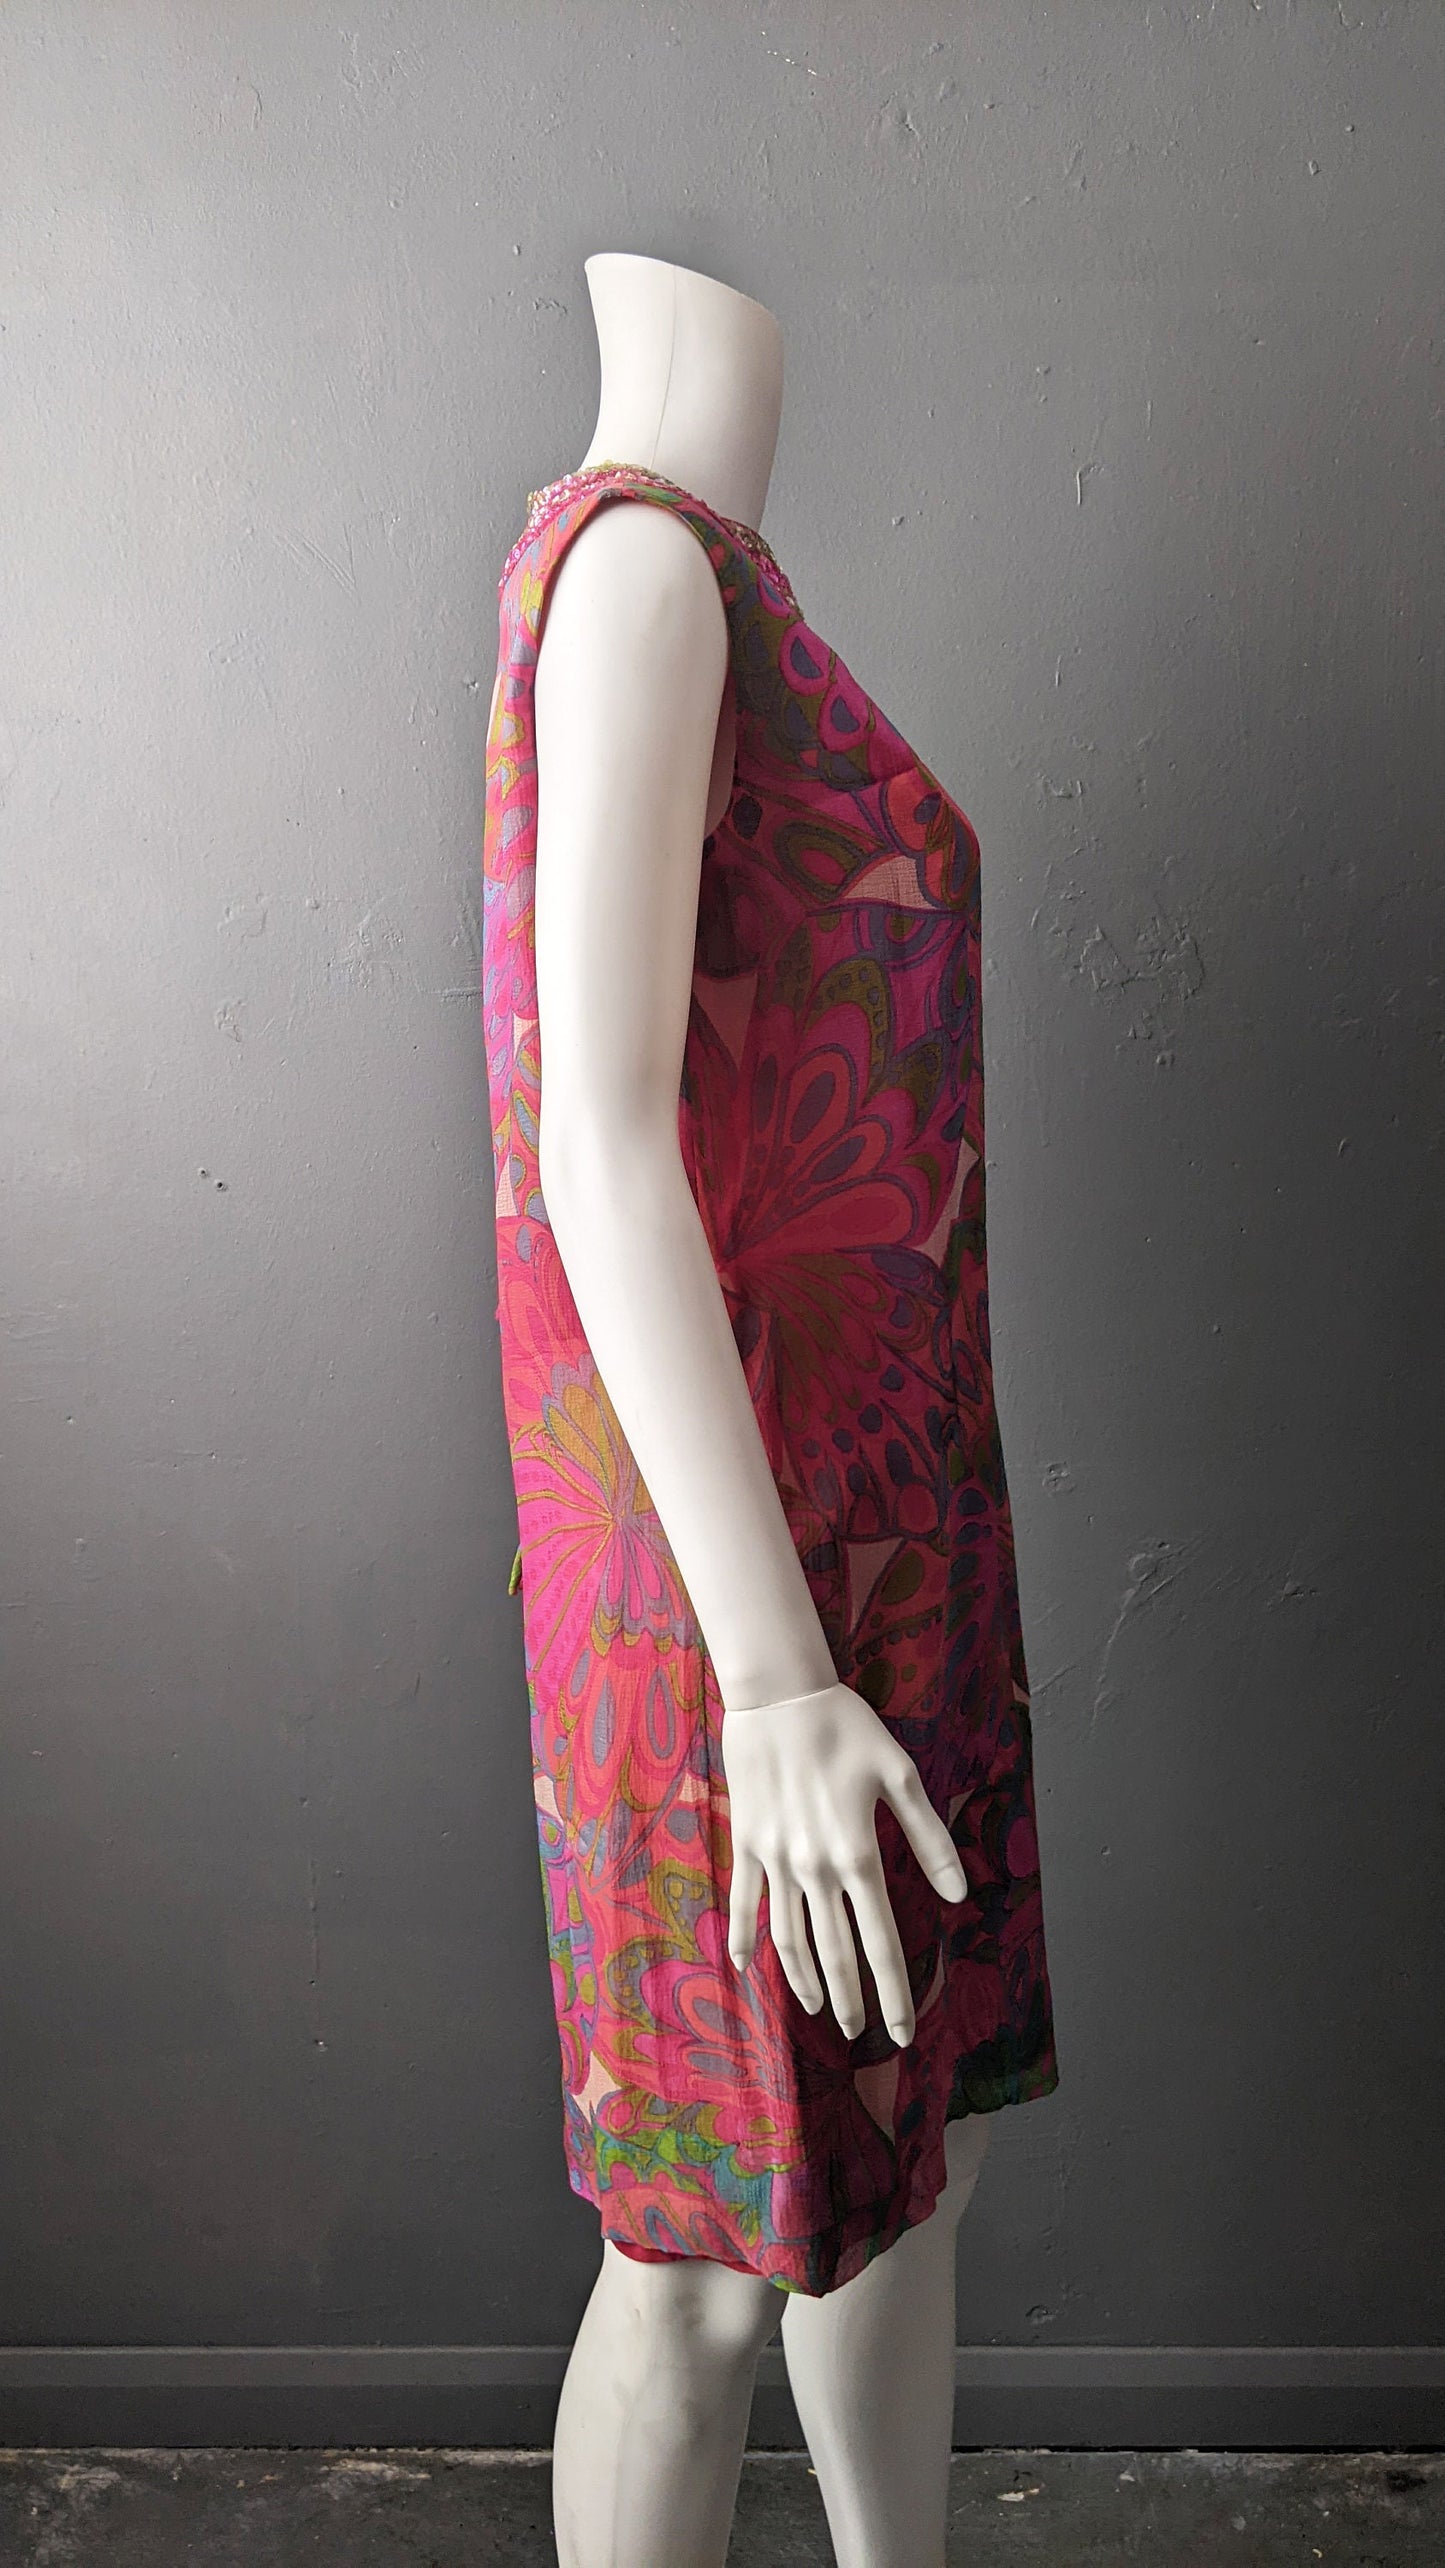 60s Psychedelic Silk Shift Dress with Sequin Collar by Robert Dorland of London, Size Small Medium